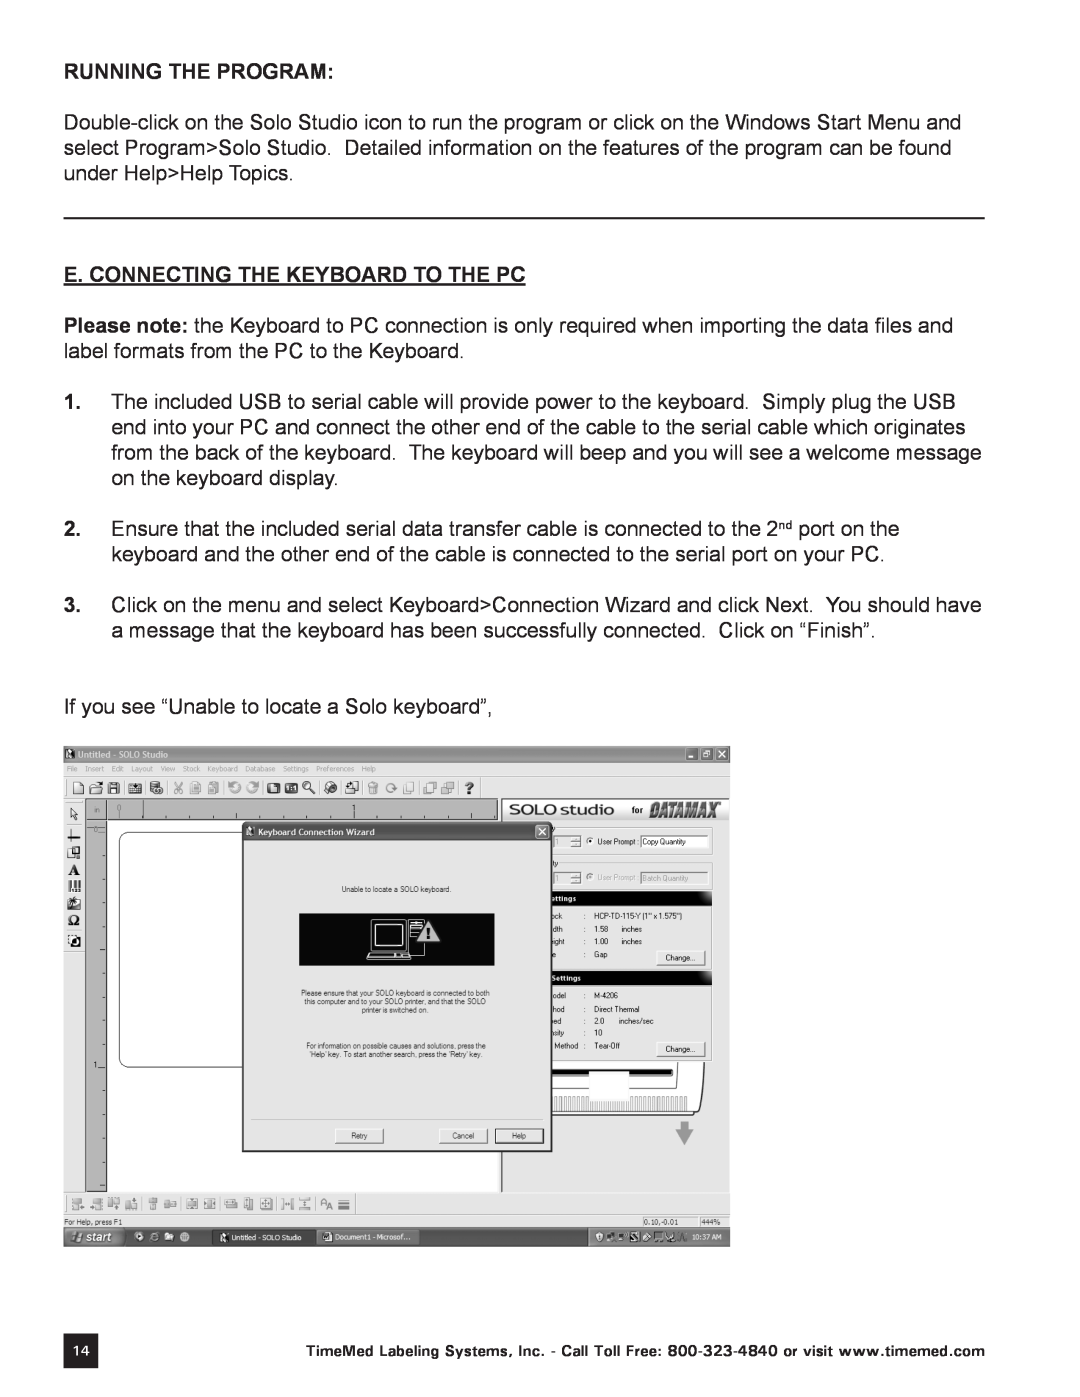 Keystone Computer Keyboard manual Running the program, E. Connecting the keyboard to the PC 